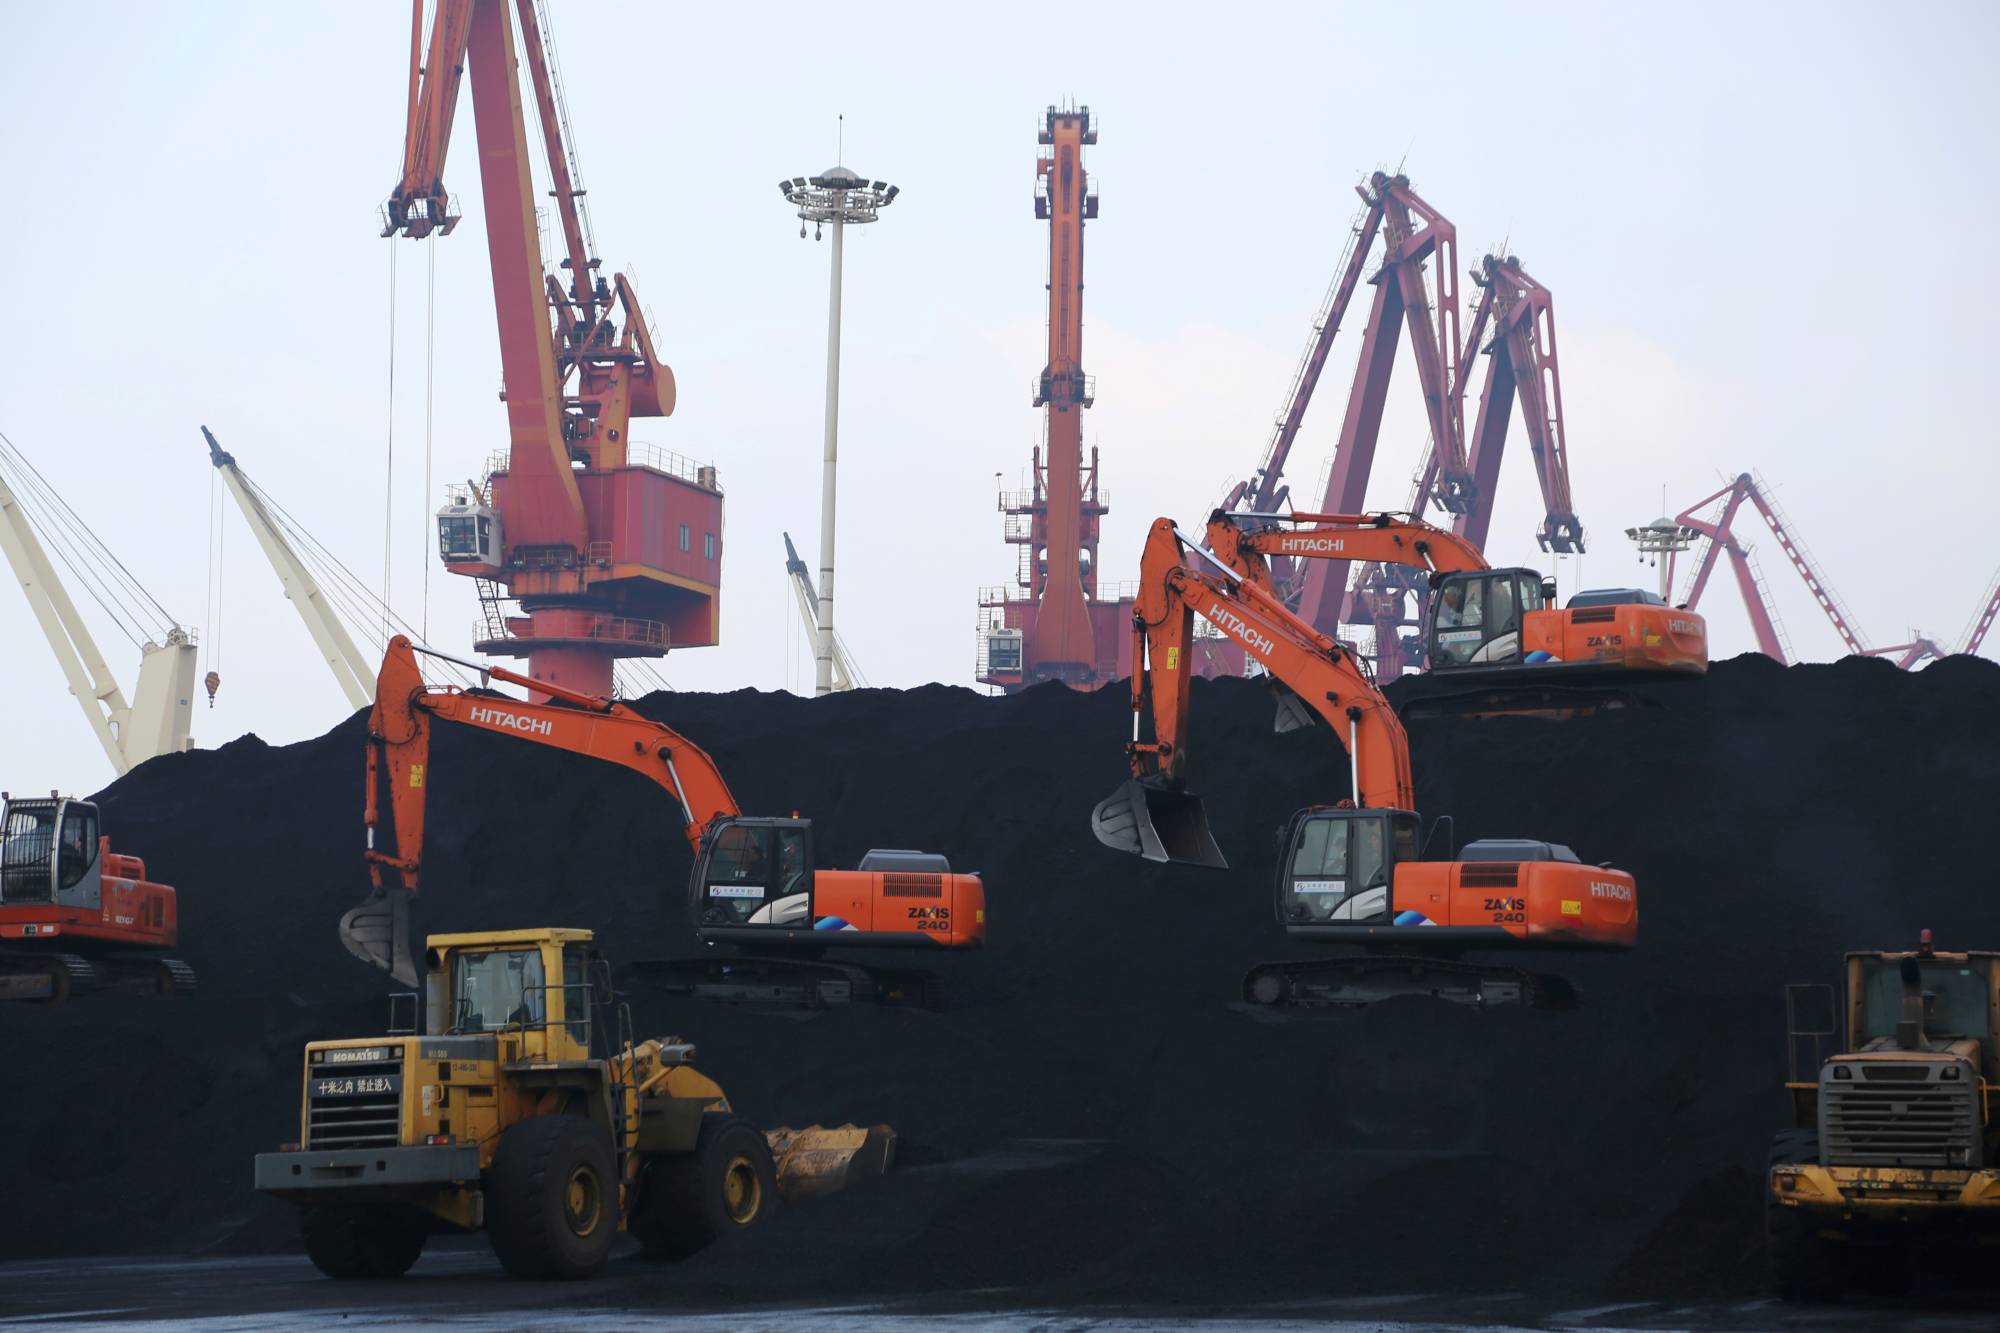 Workers unload imported coal at a port in Lianyungang, Jiangsu province, China, in December. A retreat from financial institutions in developed countries has paved the way for Chinese companies to invest in the coal industry in Africa.  | VIA REUTERS